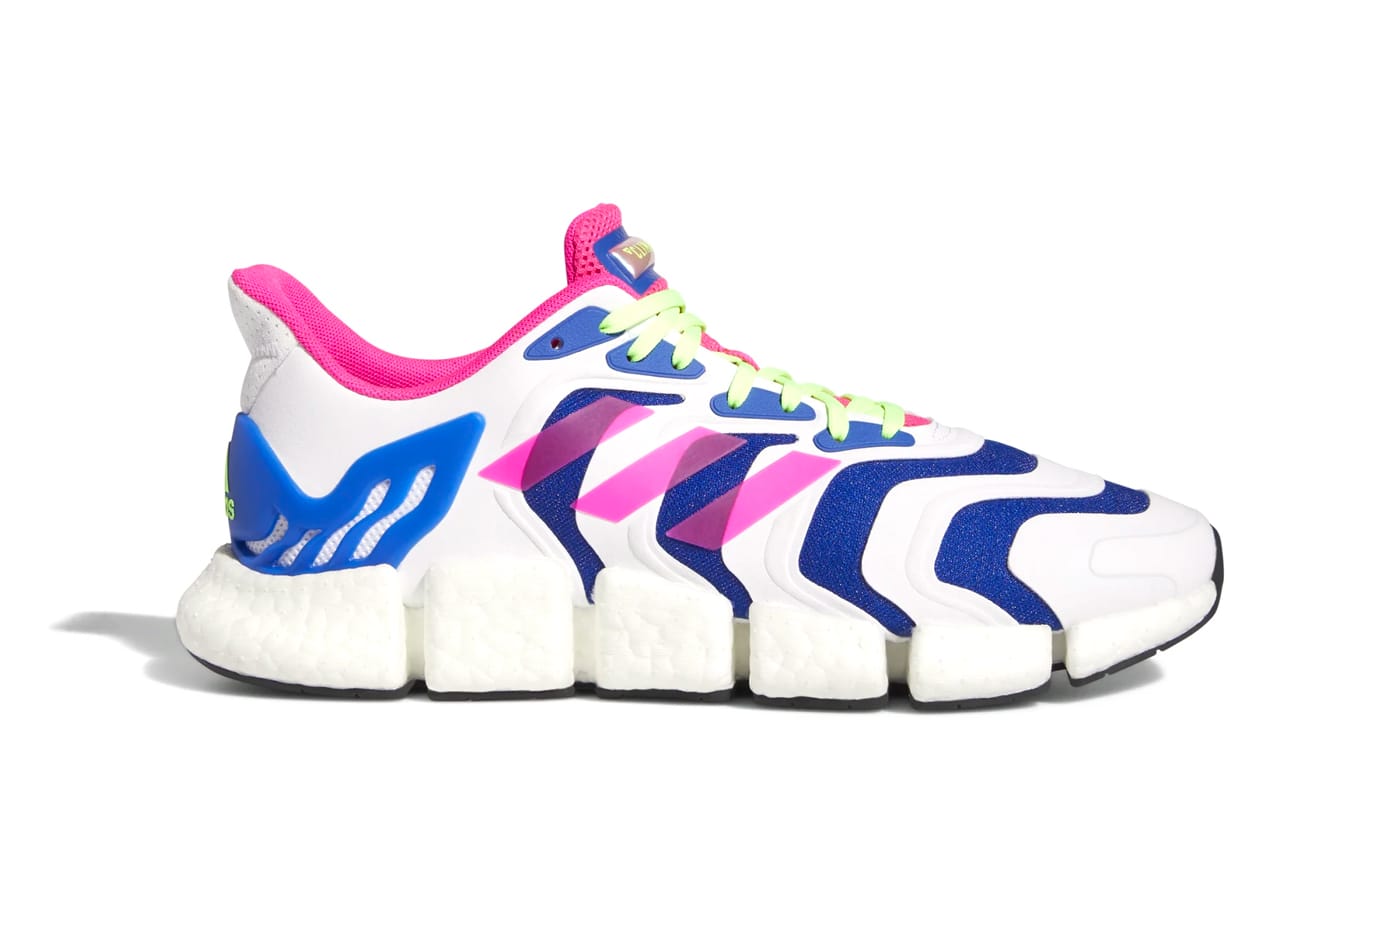 adidas climacool experience